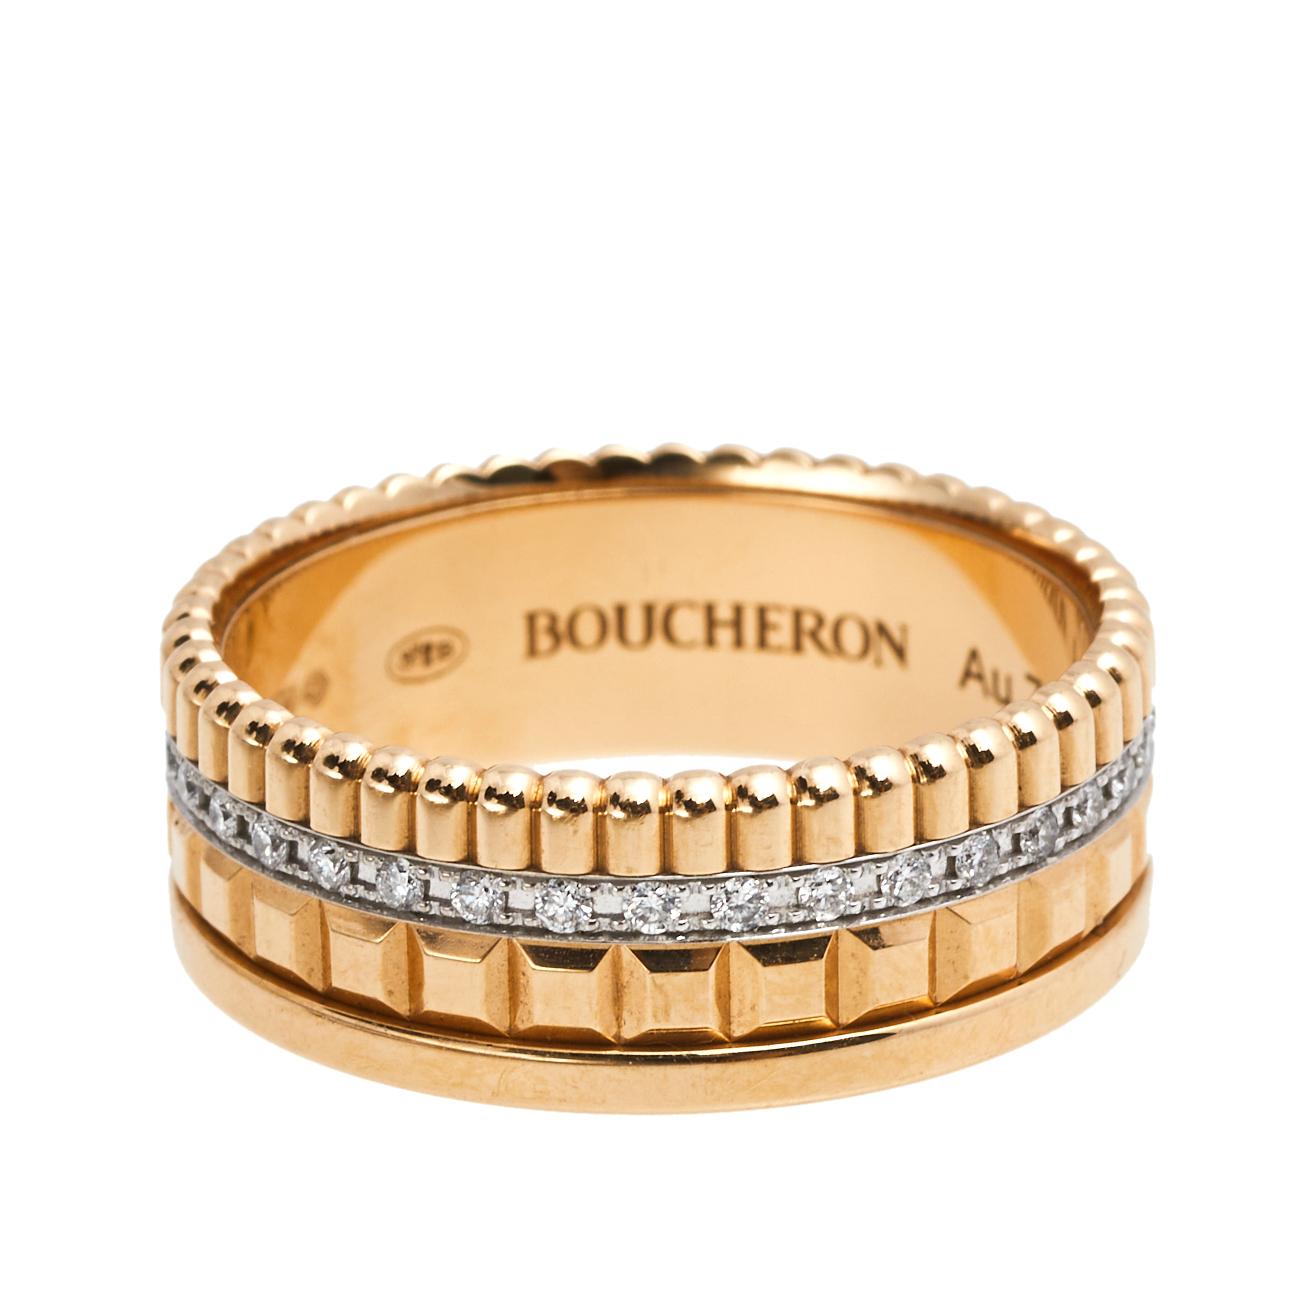 Boucheron's Quatre collection beautifully presents the spirit of the brand, exemplifying craftsmanship, and an intricate play of textures and gold. The Quatre Radiant collection gifts you this ring arranged preciously with multiple 18k gold bands